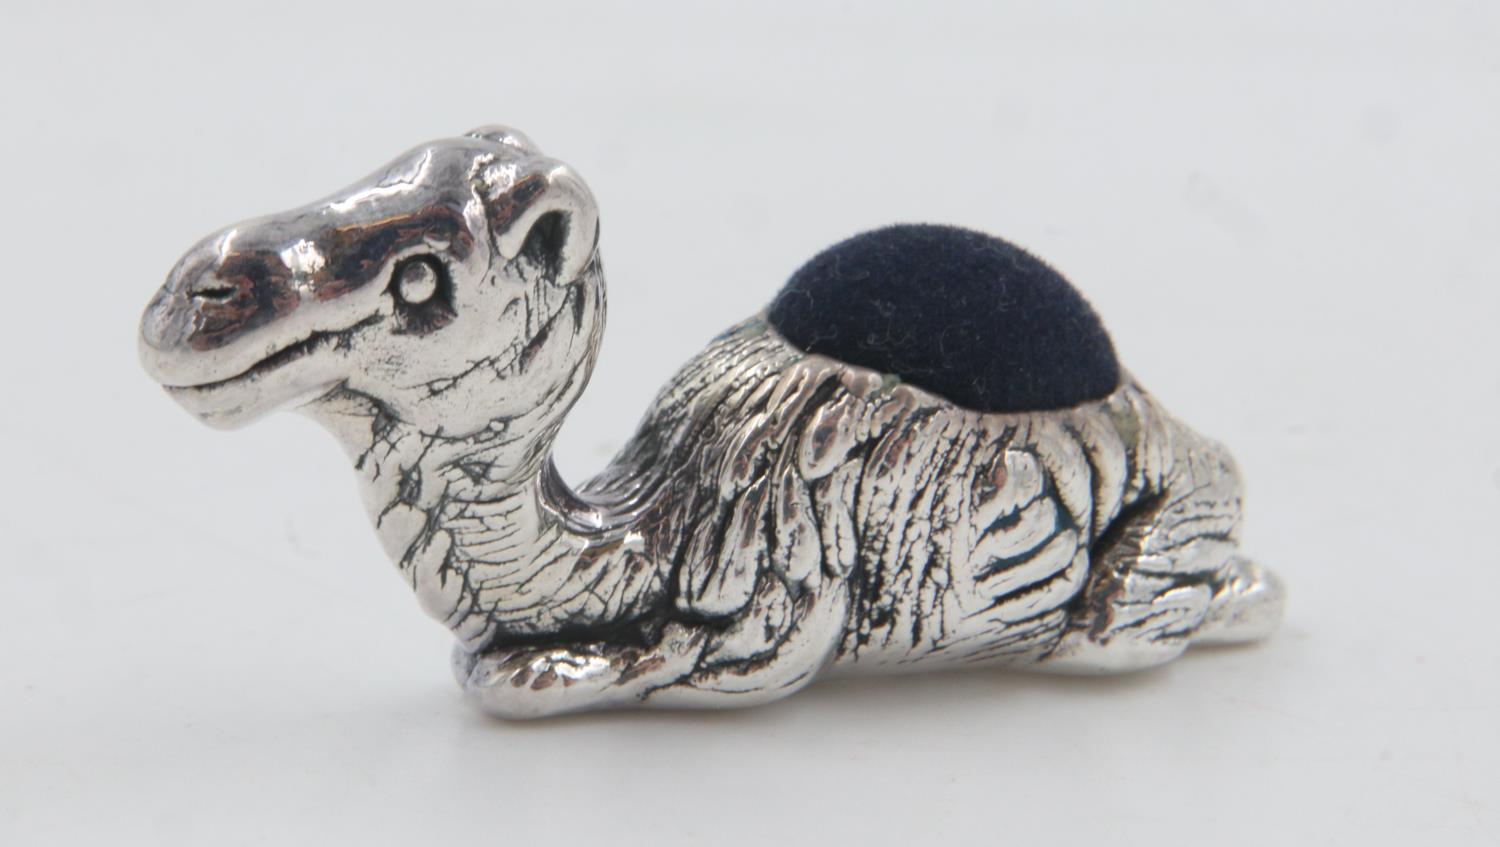 Silver camel form pin cushion, L: 55 mm. UK P&P Group 1 (£16+VAT for the first lot and £2+VAT for